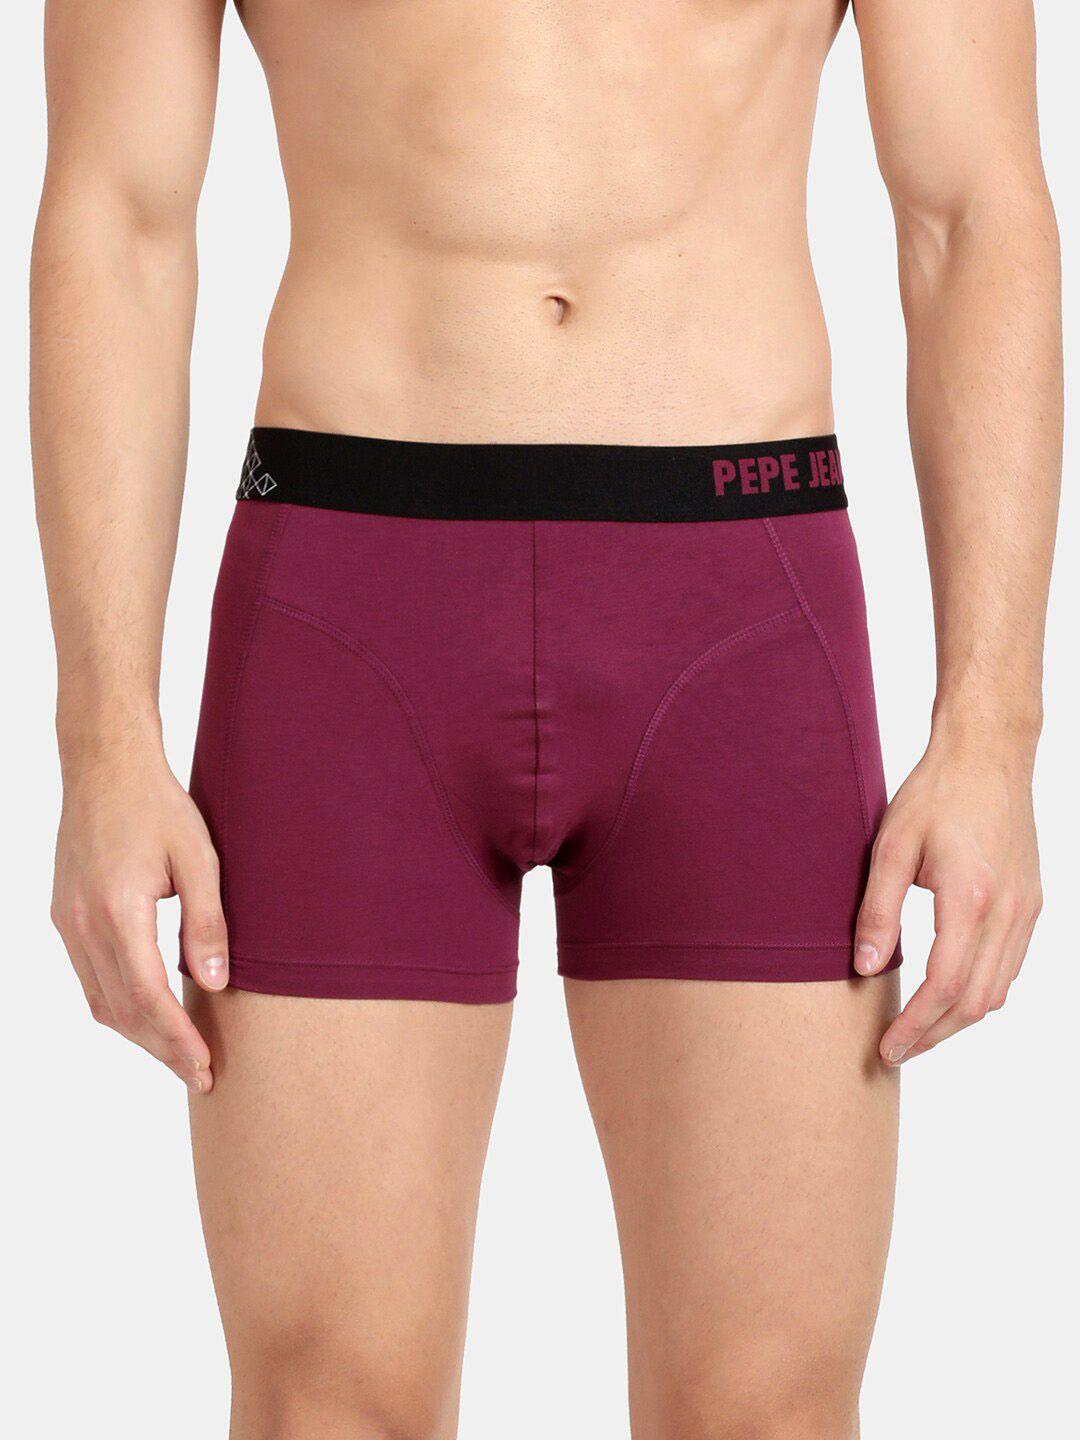 pepe jeans men magenta purple solid comfort fit mid-rise no-marks stretchable trunk opt03